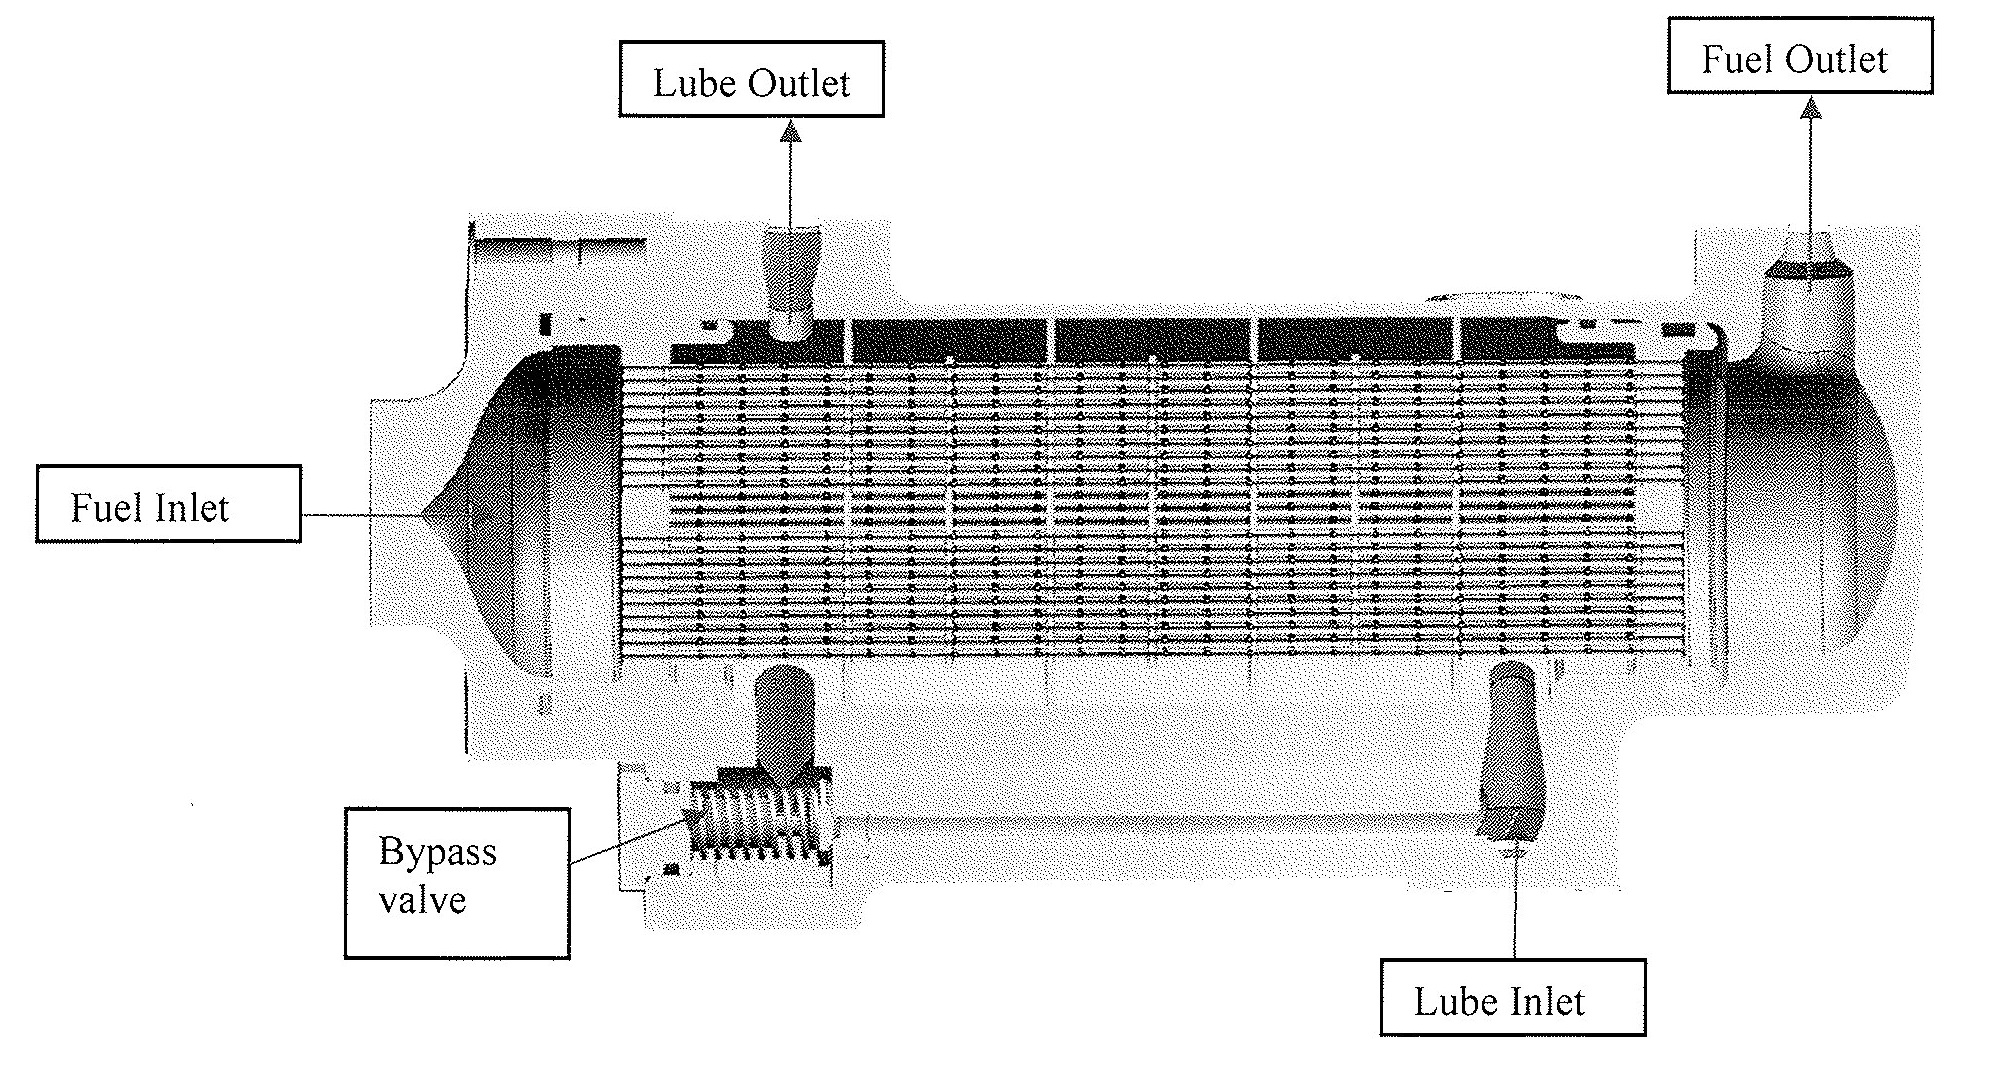 Fuel cooled oil cooler for aero engines2.jpg